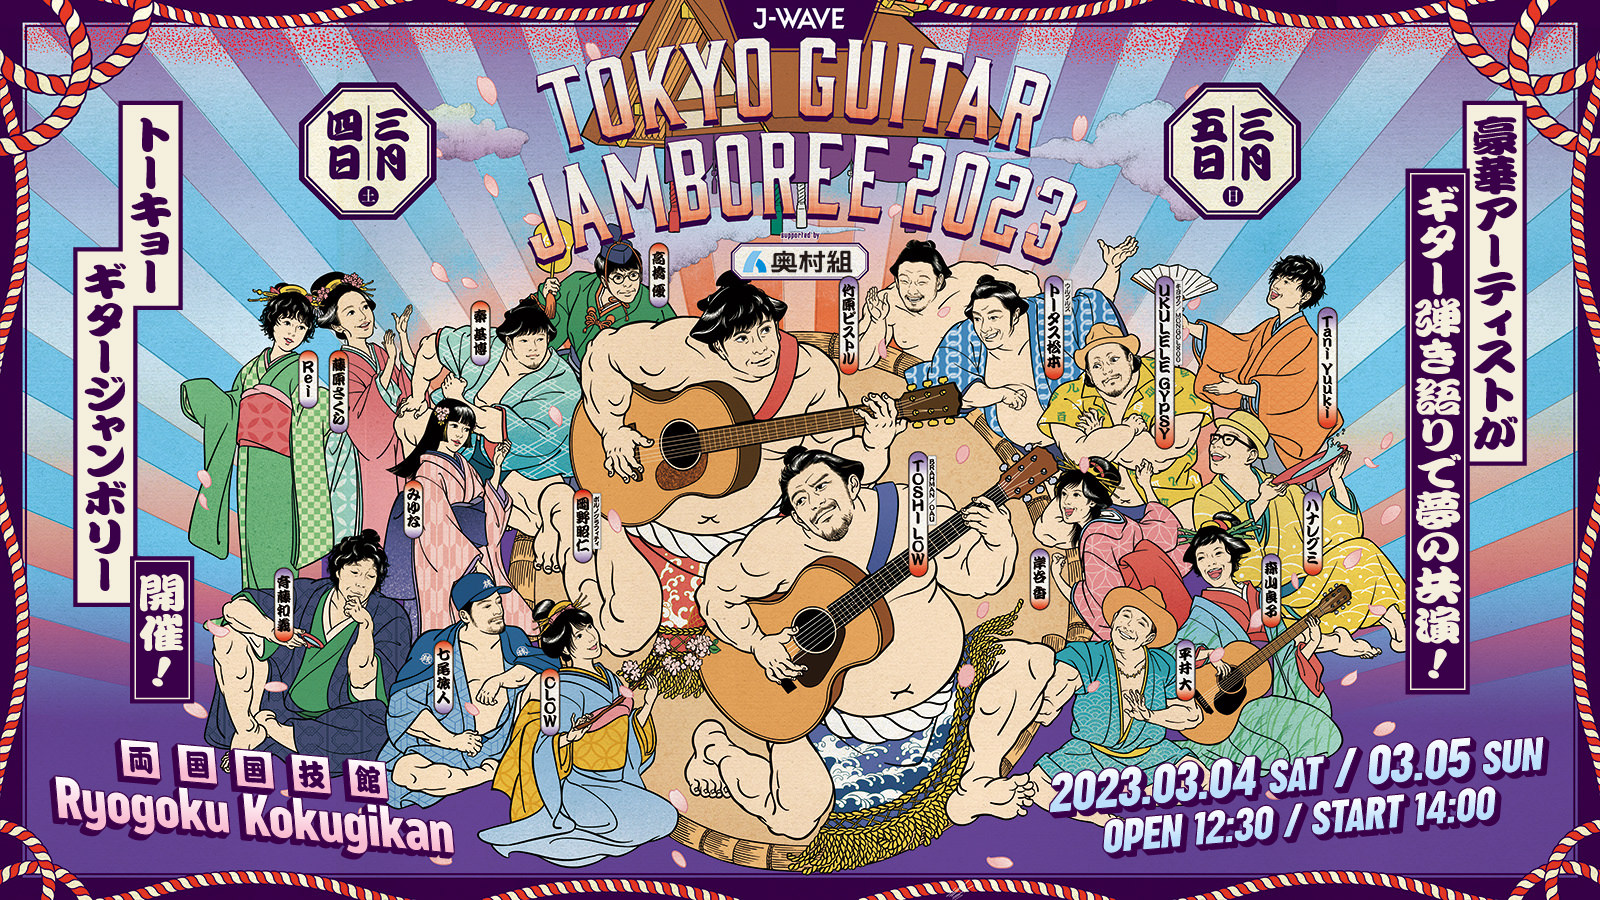 J-WAVE TOKYO GUITAR JAMBOREE 2023 supported by 奥村組